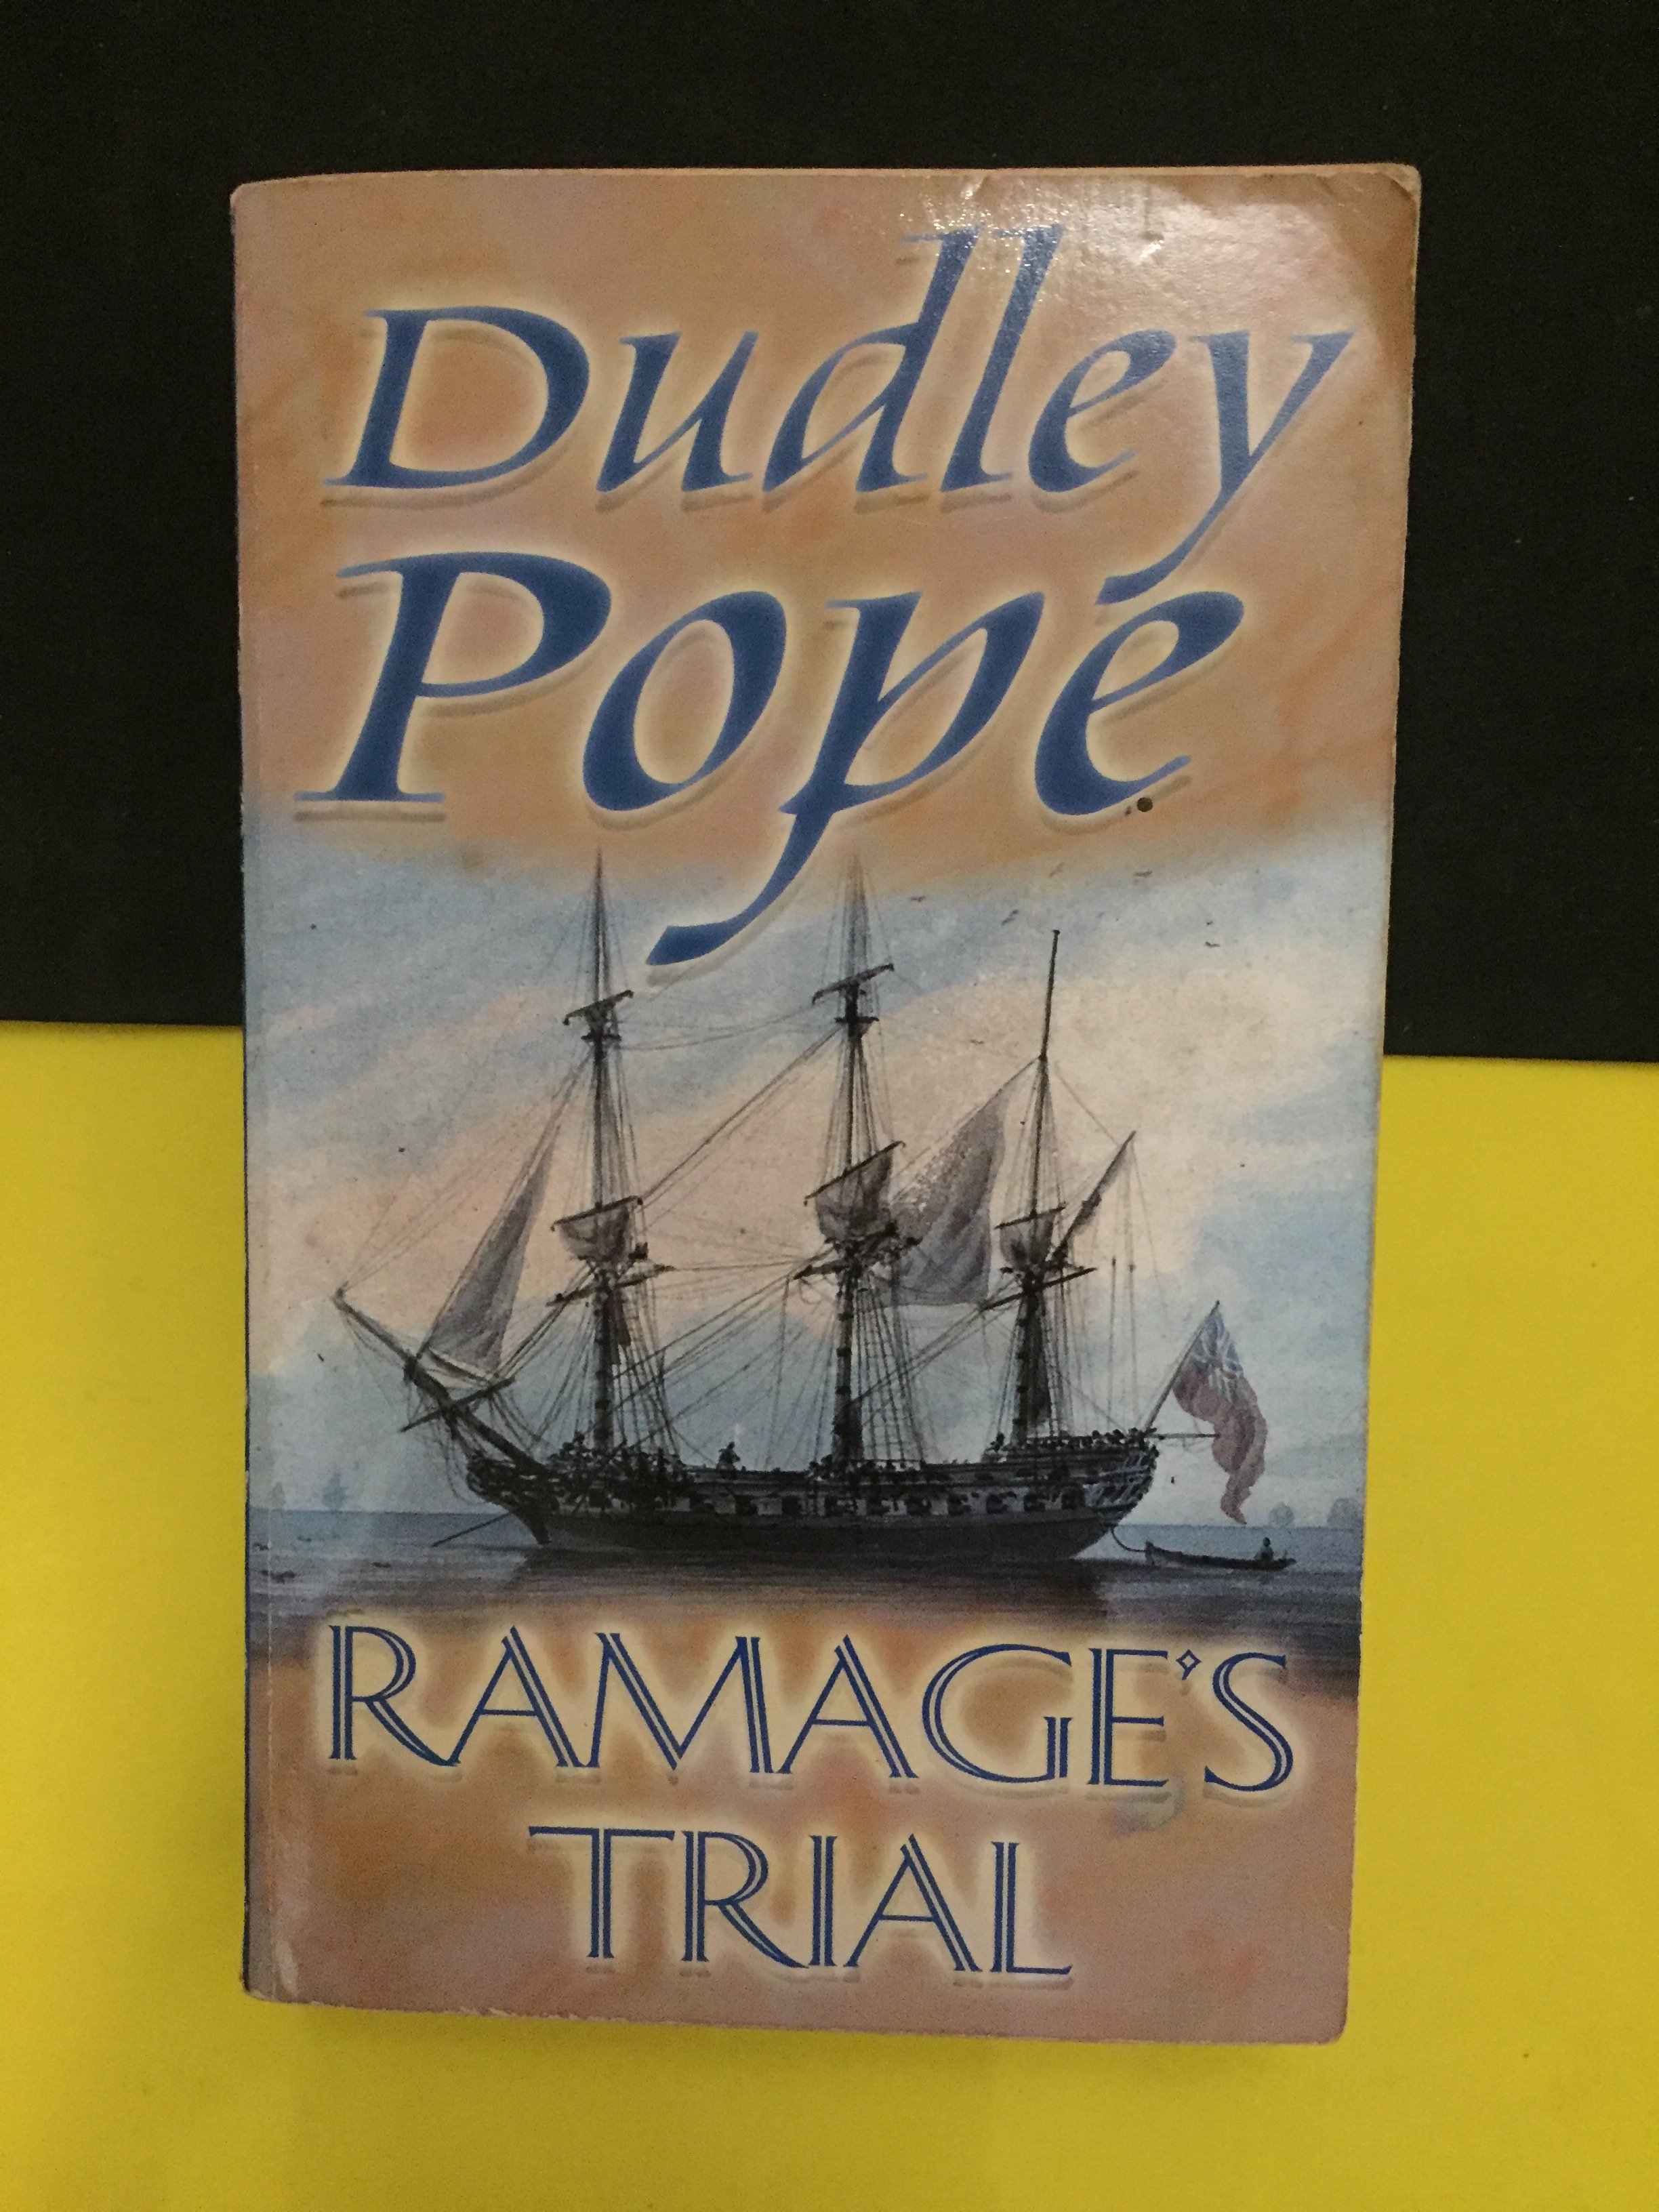 Dudley Pope - Trial